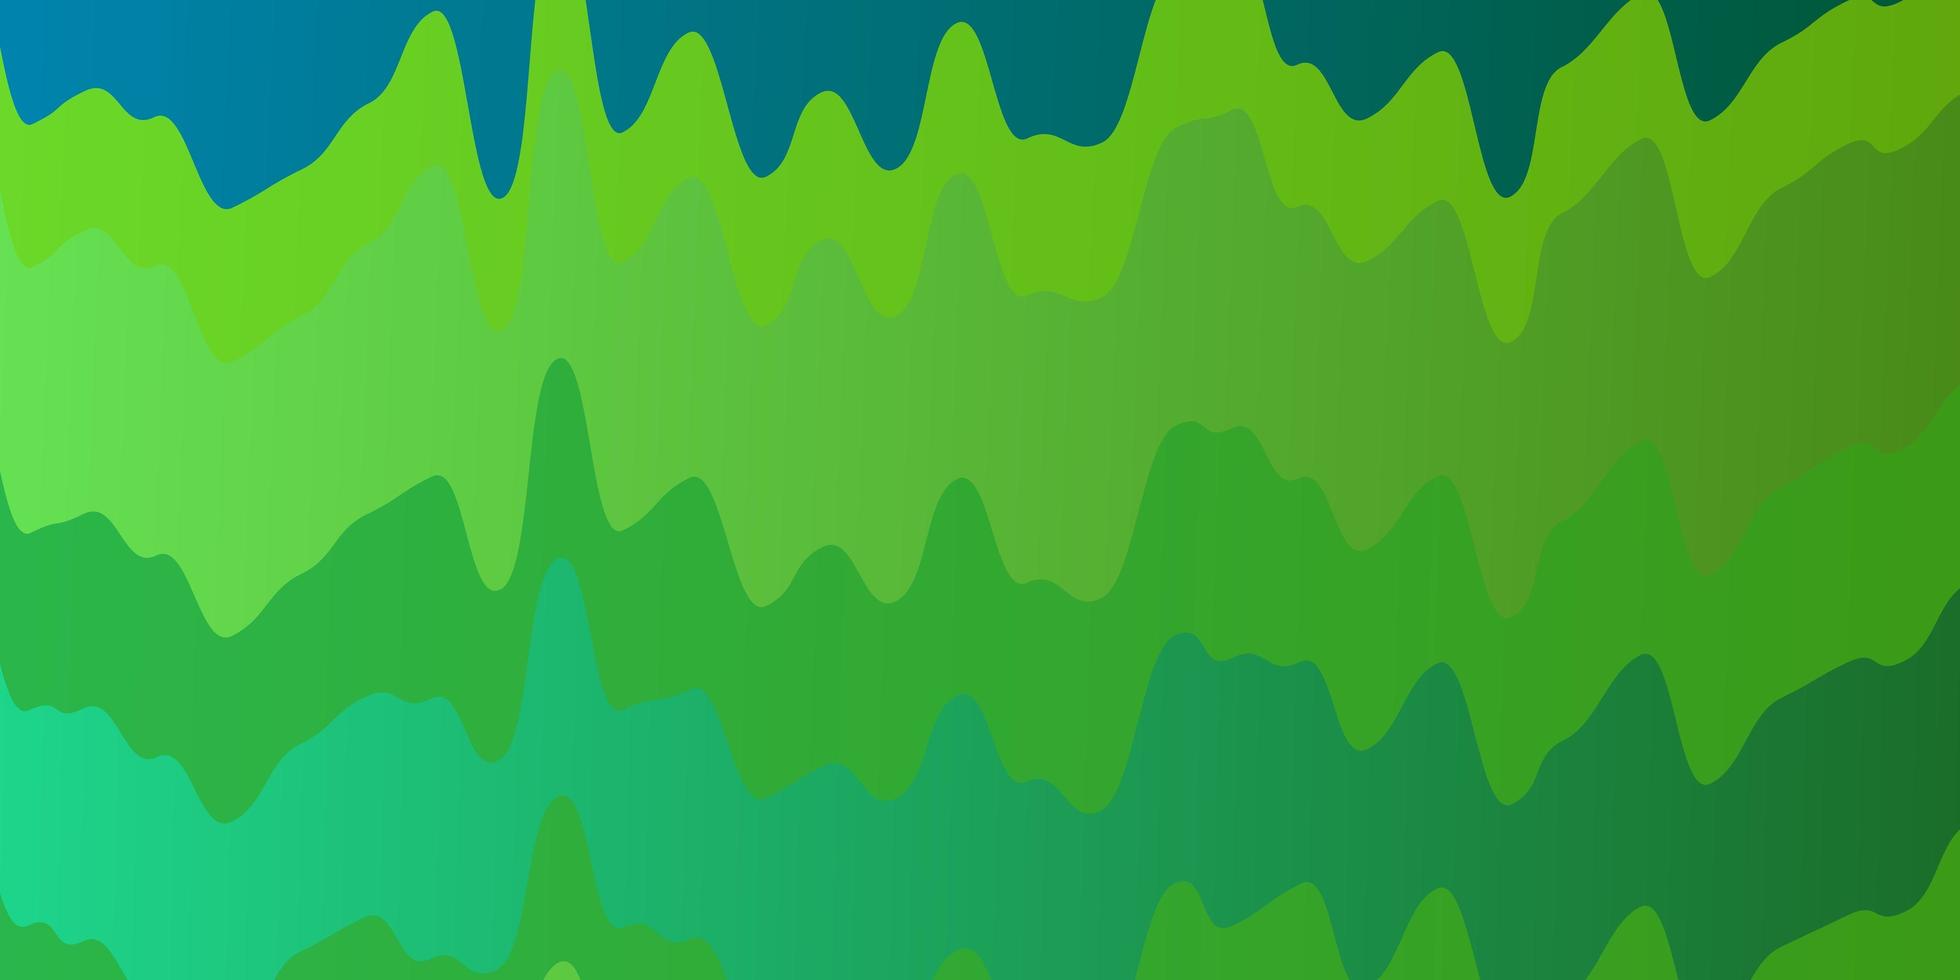 Multicolor Green Template with Wavy Lines vector